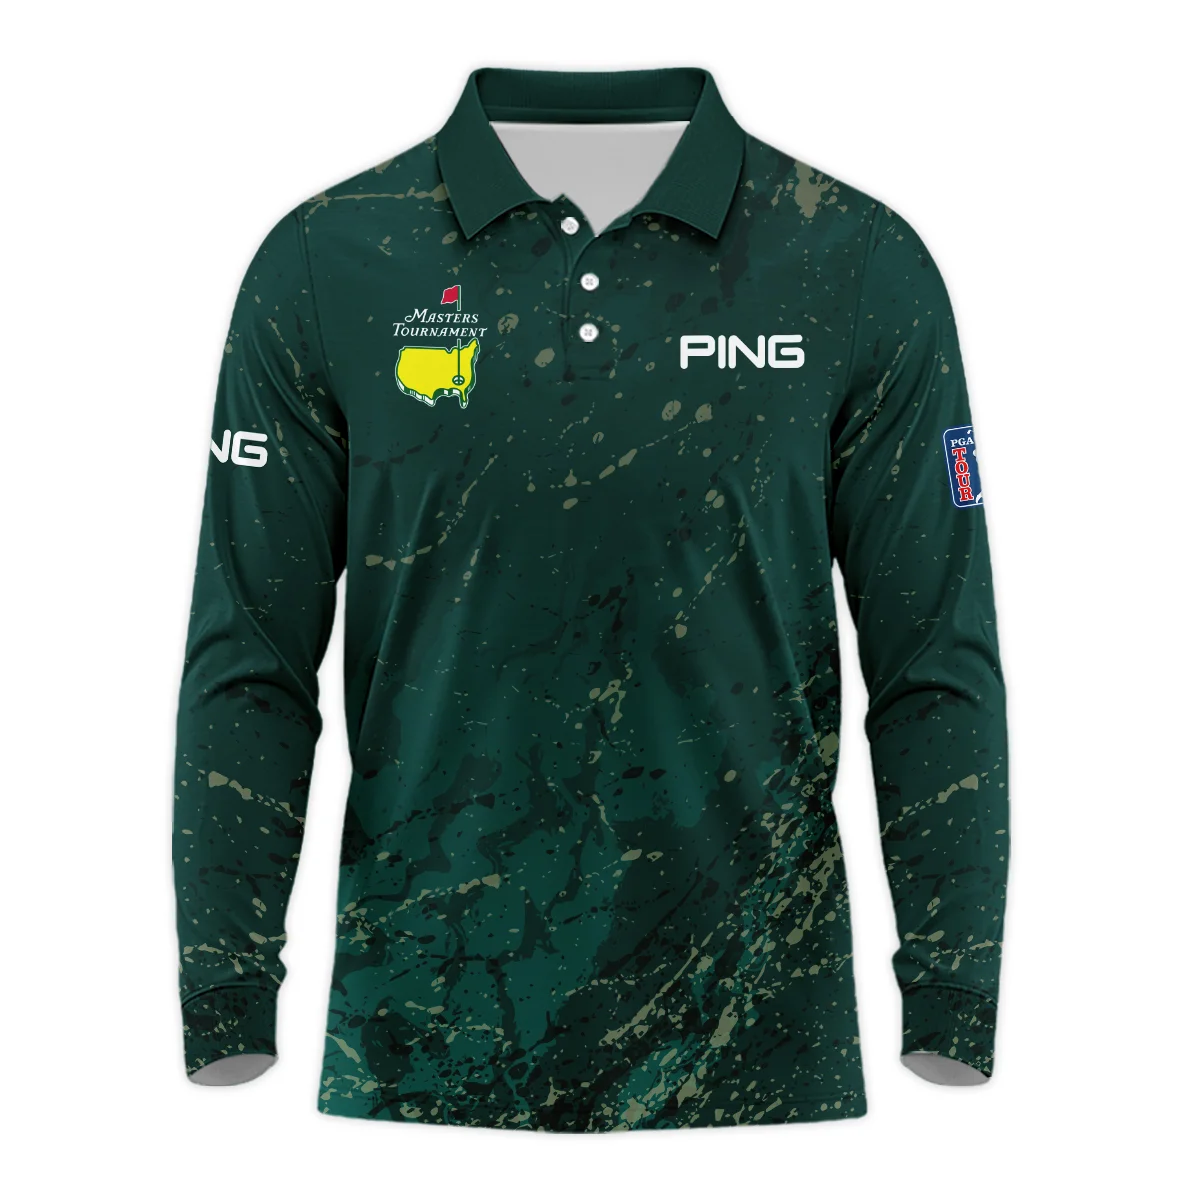 Old Cracked Texture With Gold Splash Paint Masters Tournament Ping Quarter-Zip Jacket Style Classic Quarter-Zip Jacket